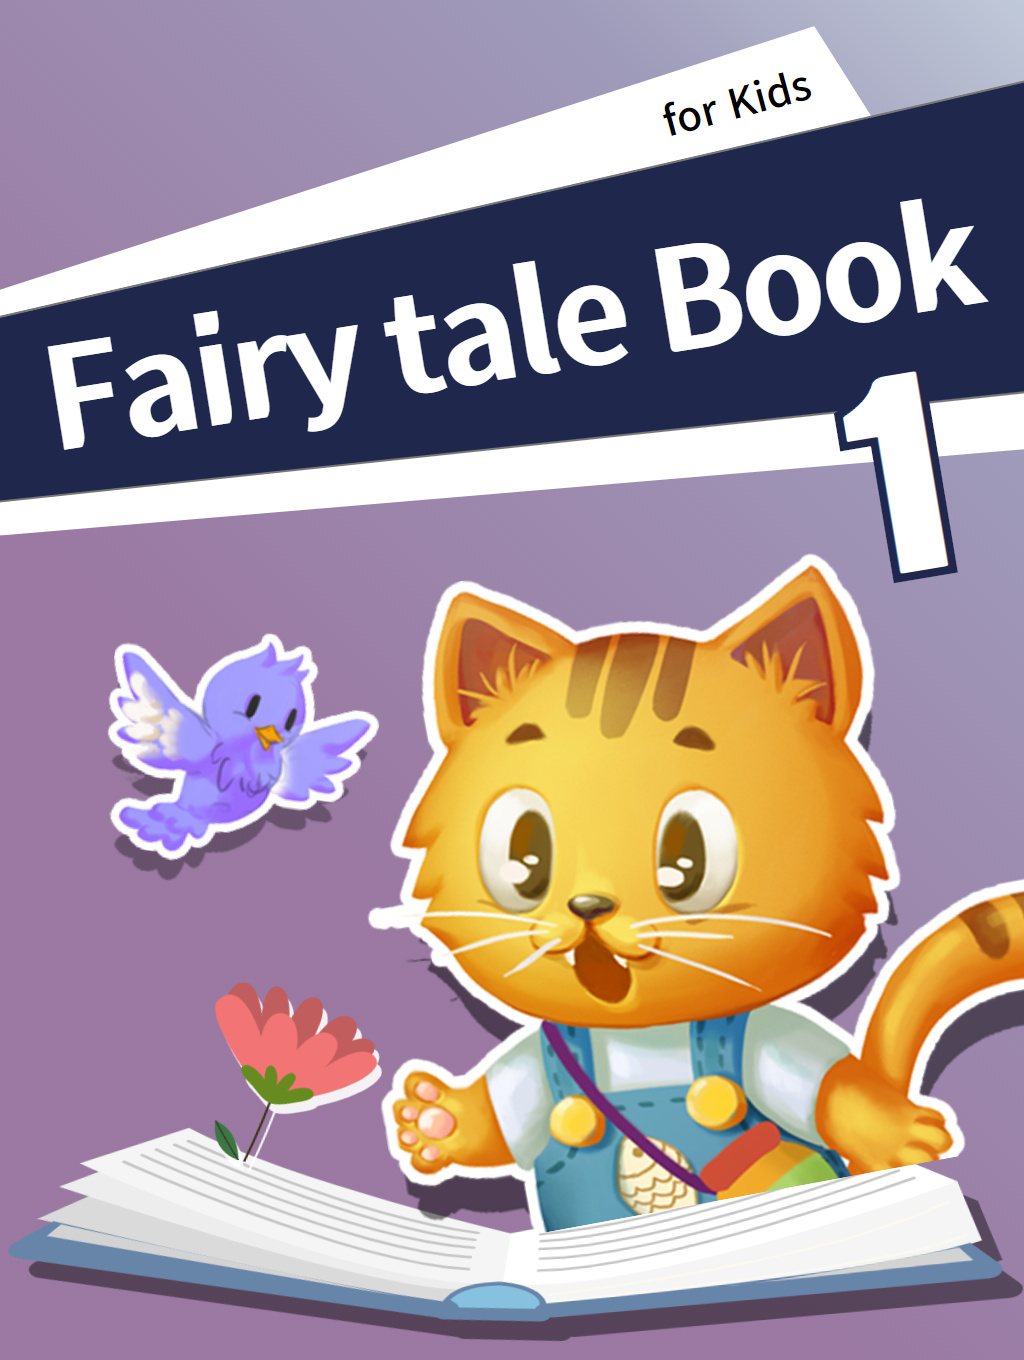 Fairy tale book for Kids 1권~3권